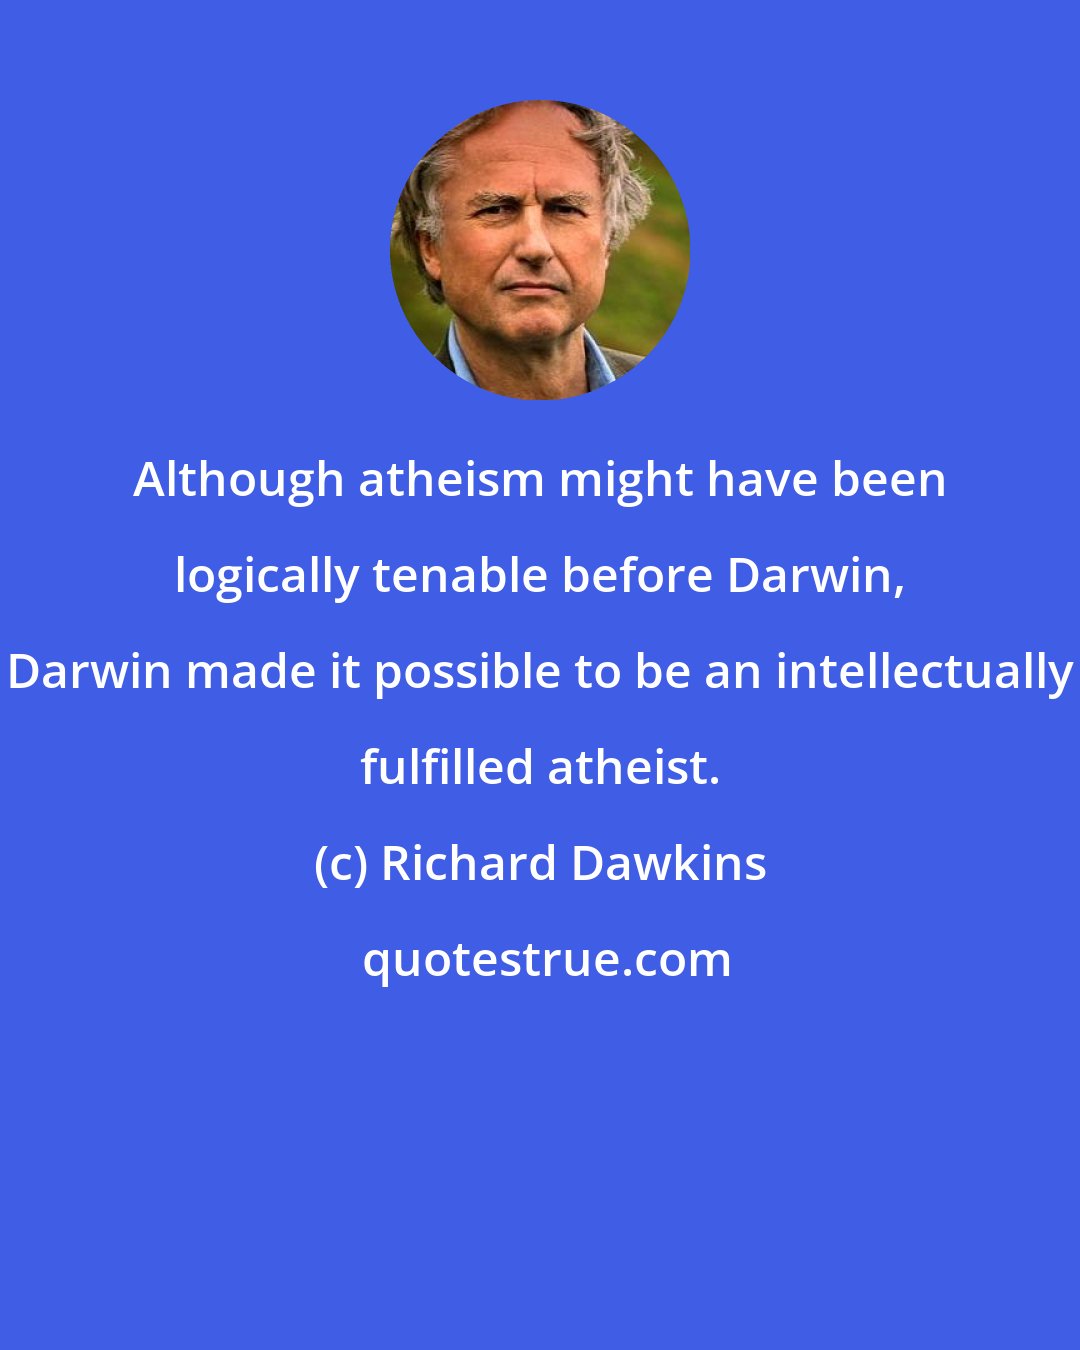 Richard Dawkins: Although atheism might have been logically tenable before Darwin, Darwin made it possible to be an intellectually fulfilled atheist.